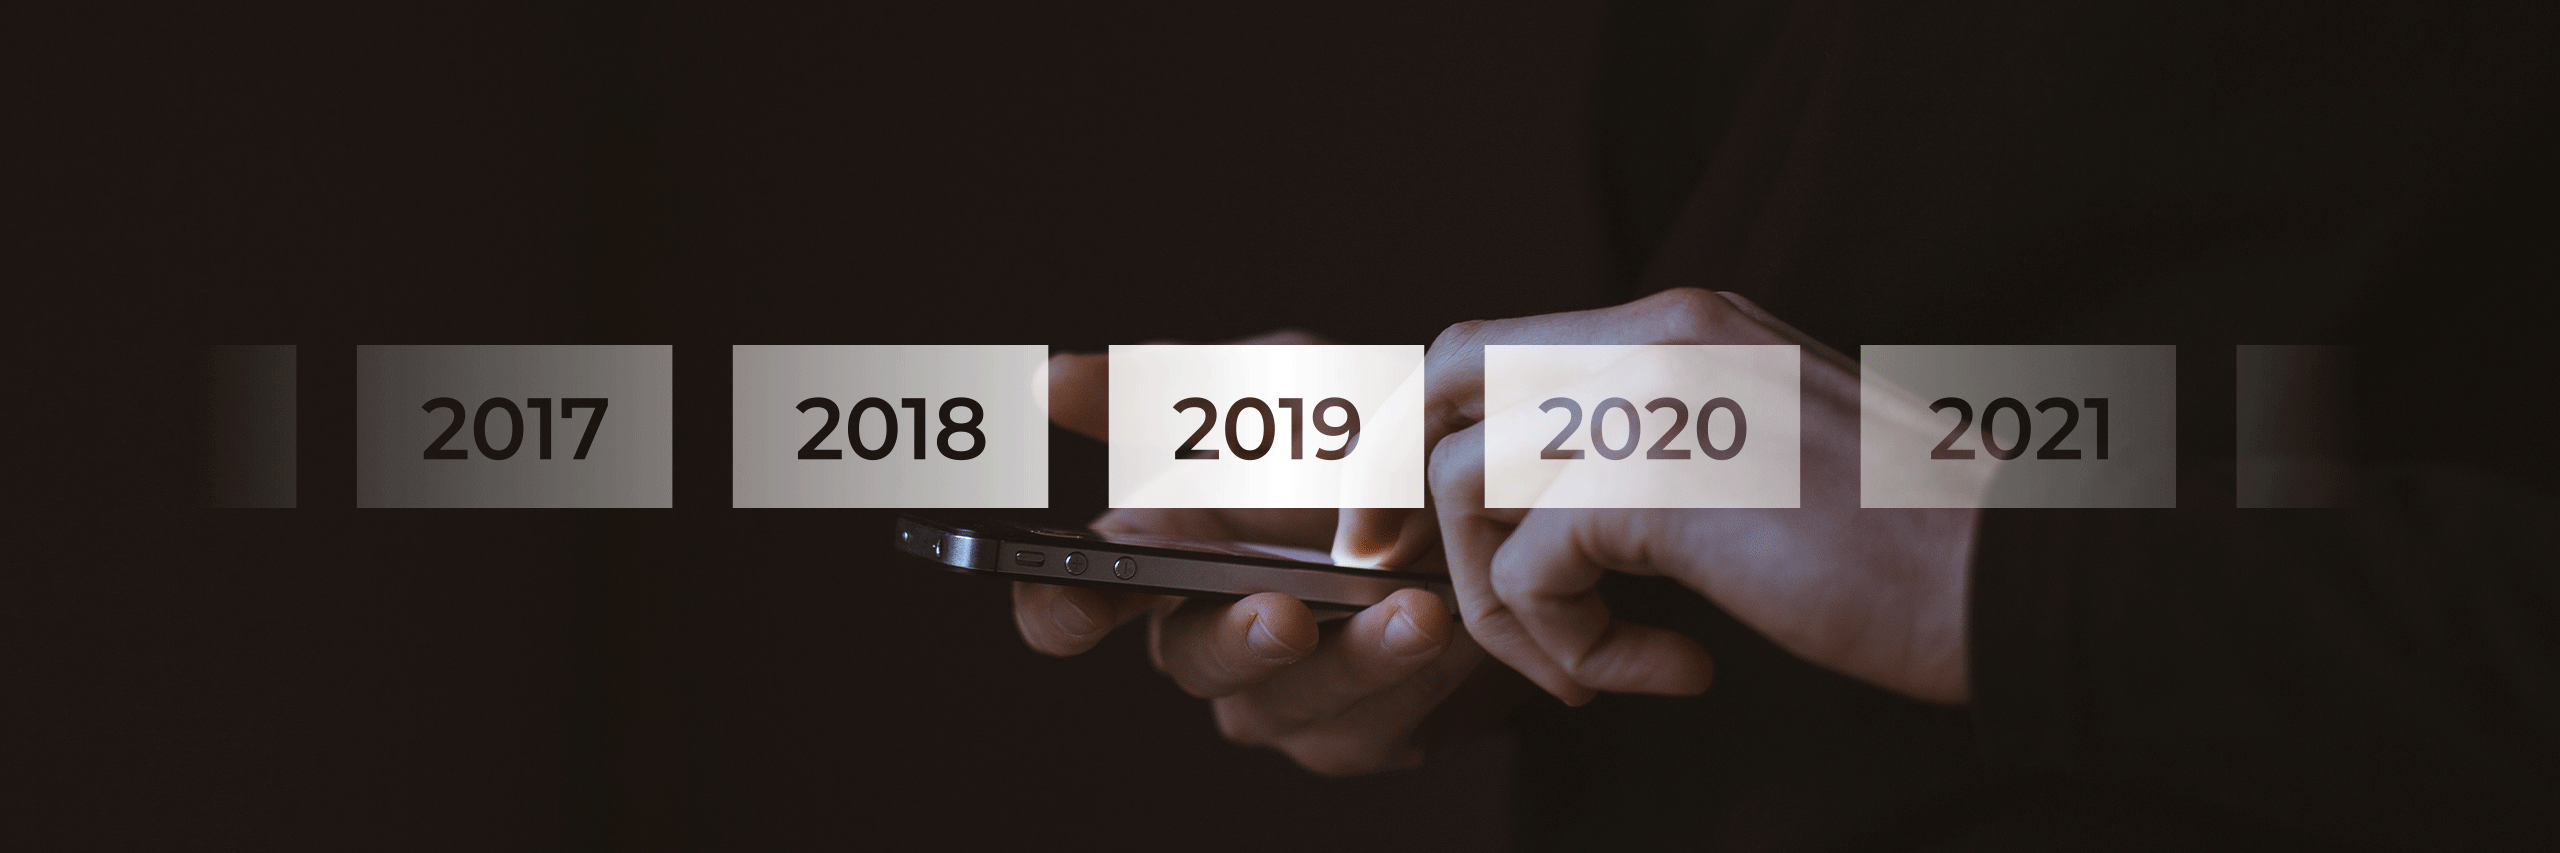 Online advertising trends to watch: 2019